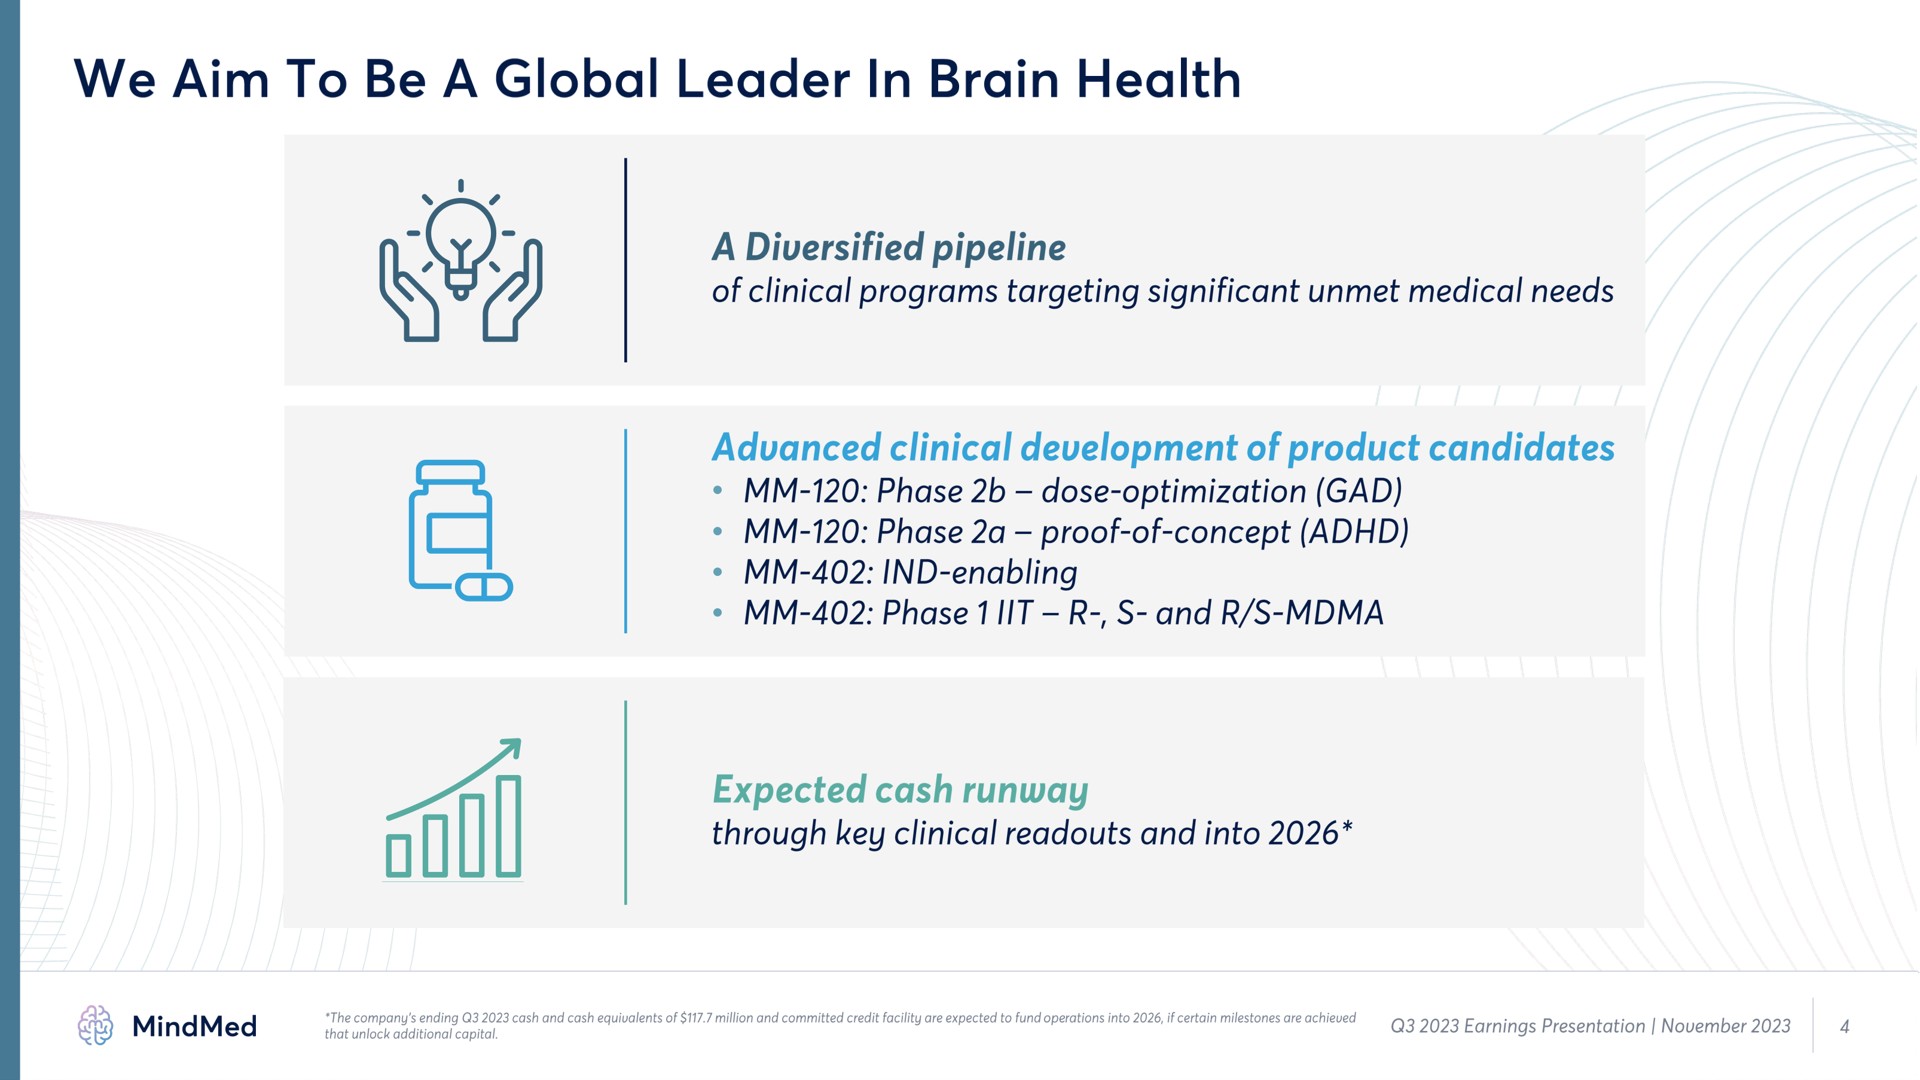 we aim to be a global leader in brain health my a diversified pipeline | MindMed